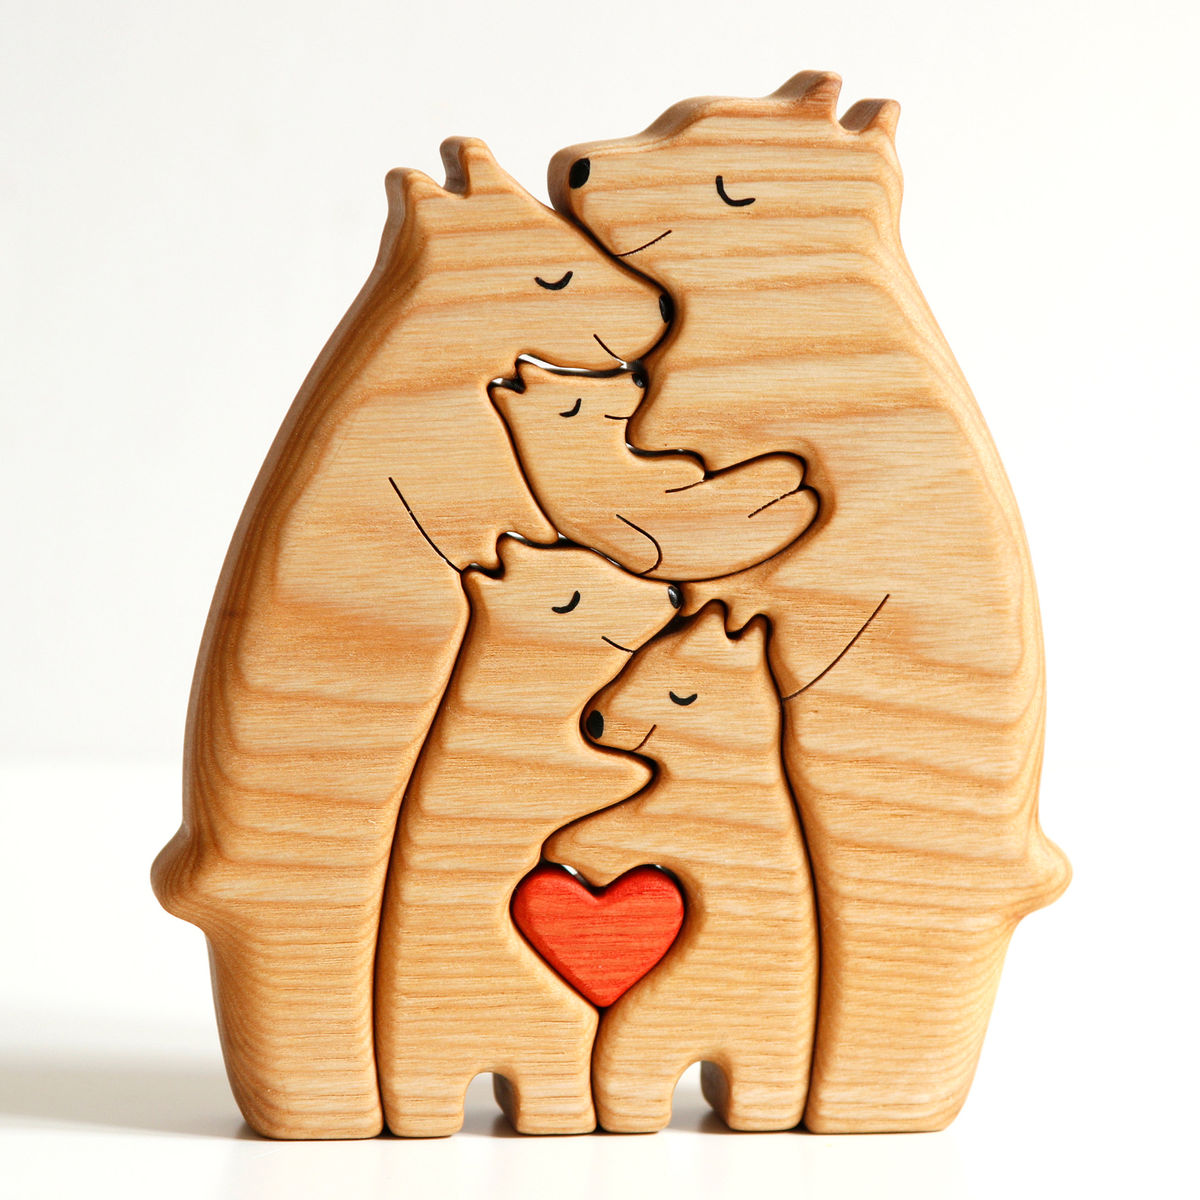 Wooden Bears family puzzle - Up to 6 Kids - Christmas Decor, Family Keepsake Gift, Home Decor_3